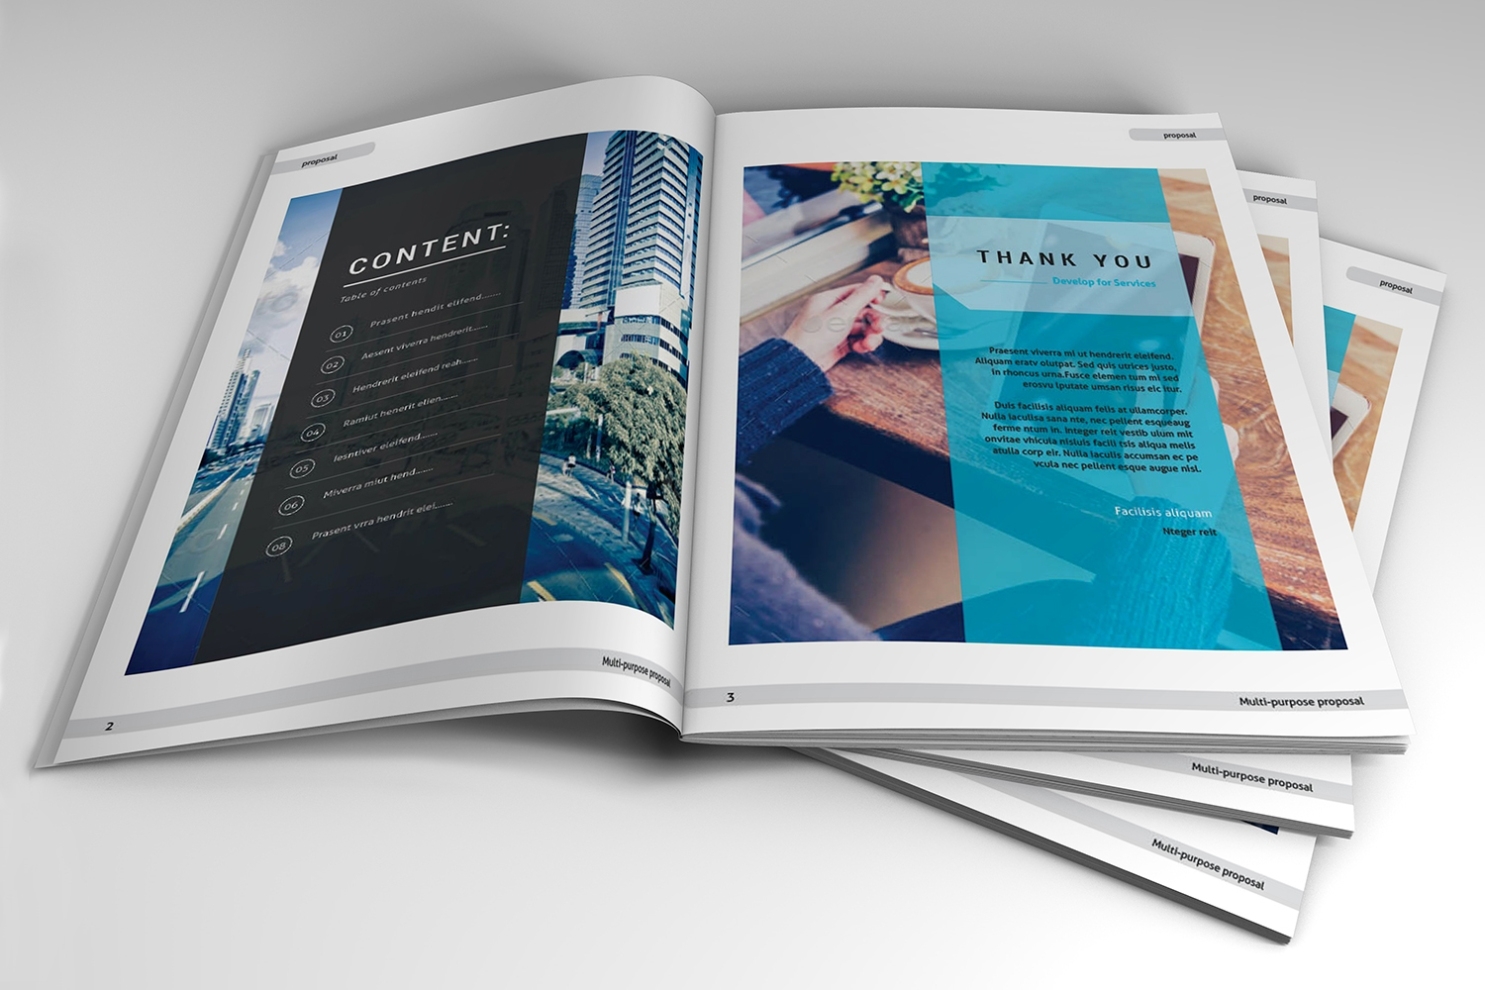 Indesign Business Proposal Template On Behance Intended For Business Proposal Template Indesign